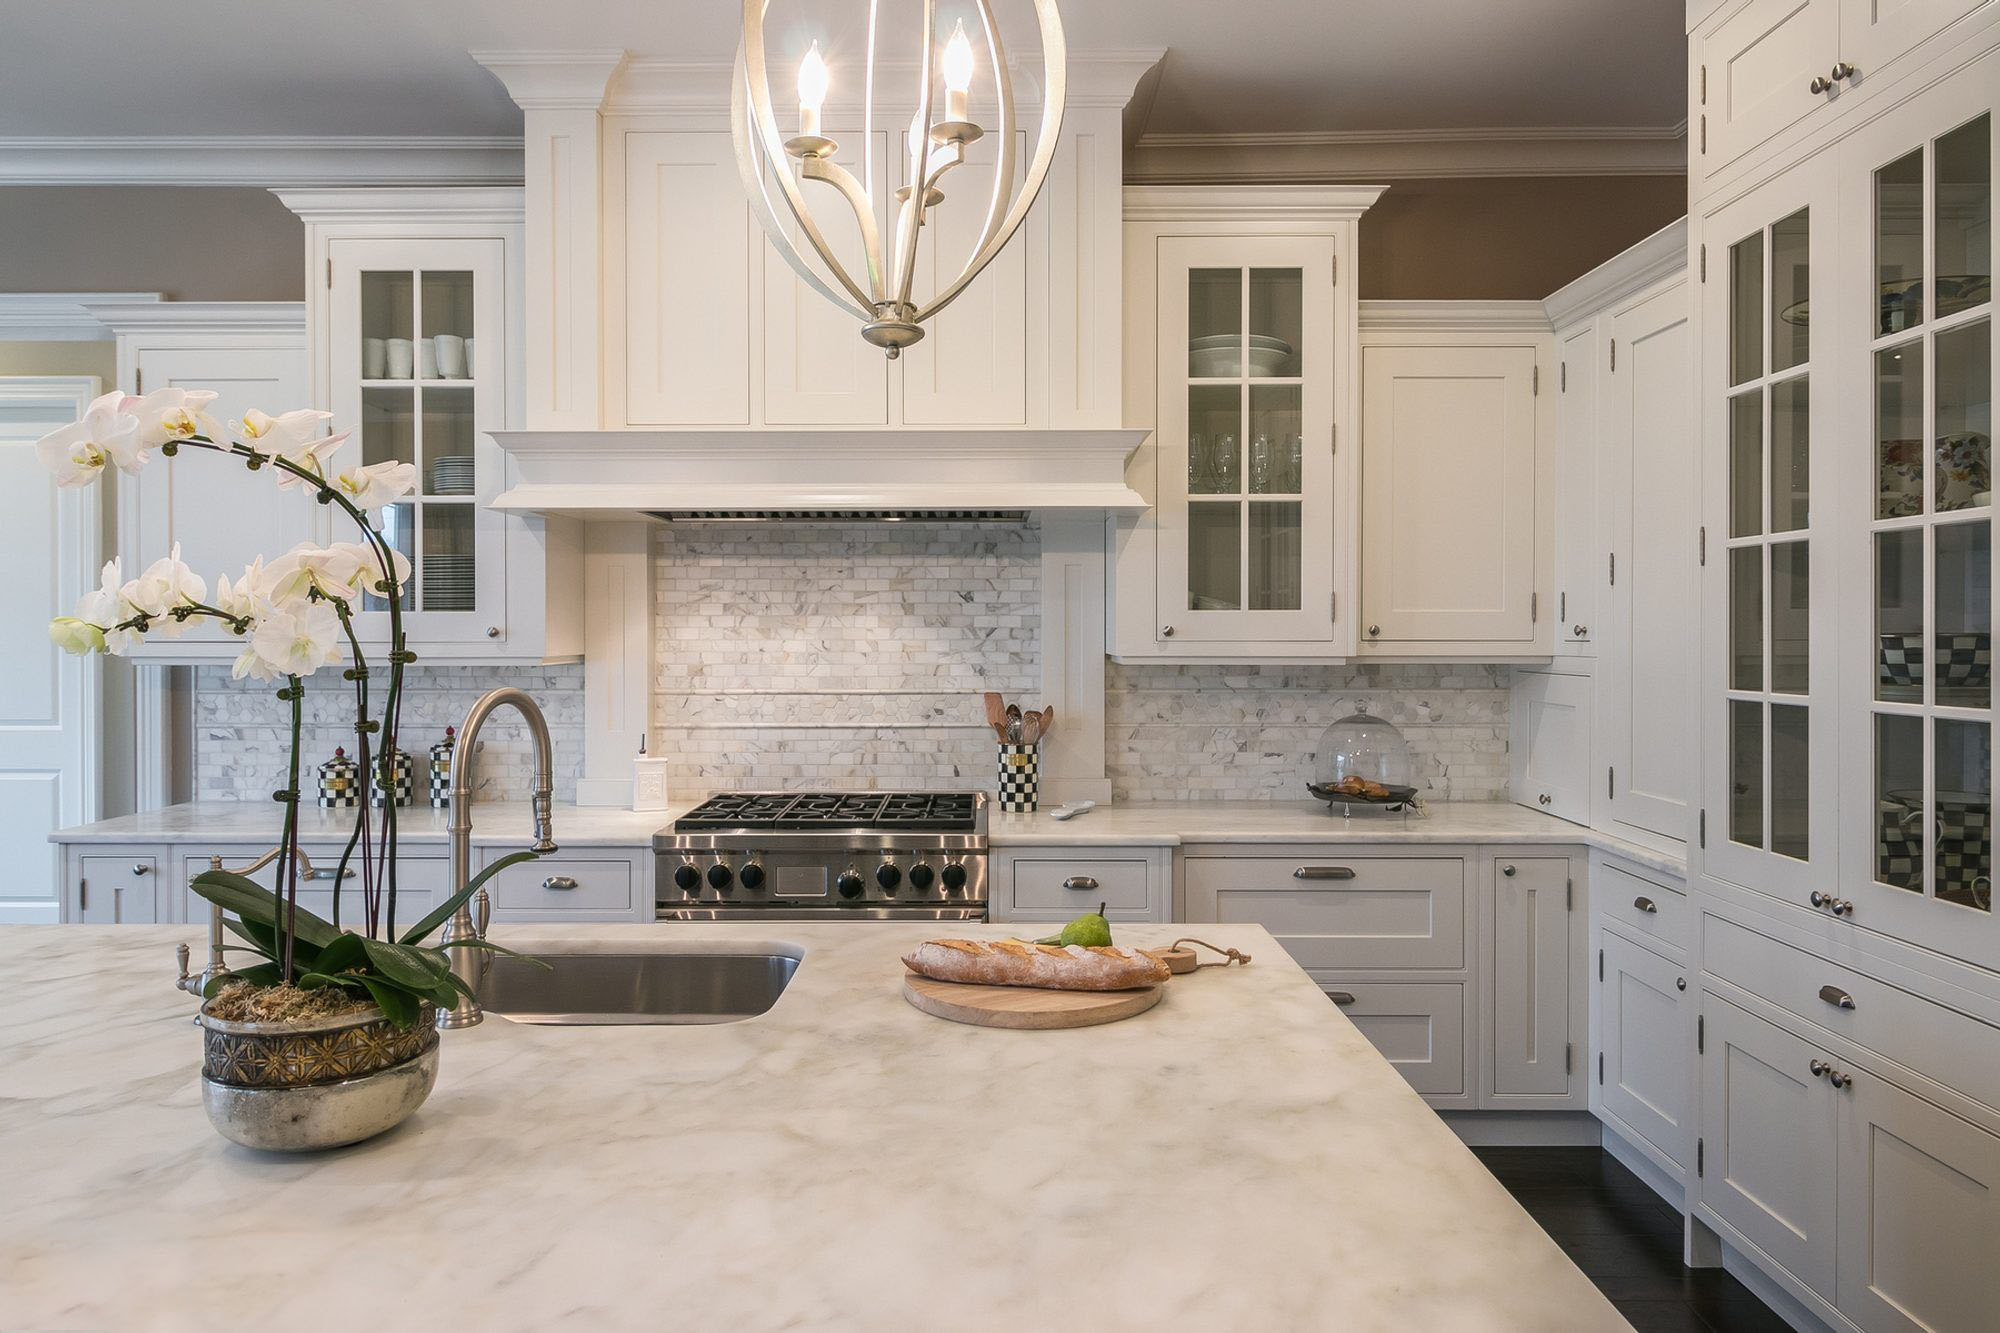 Marble counters with matching marble backsplash.